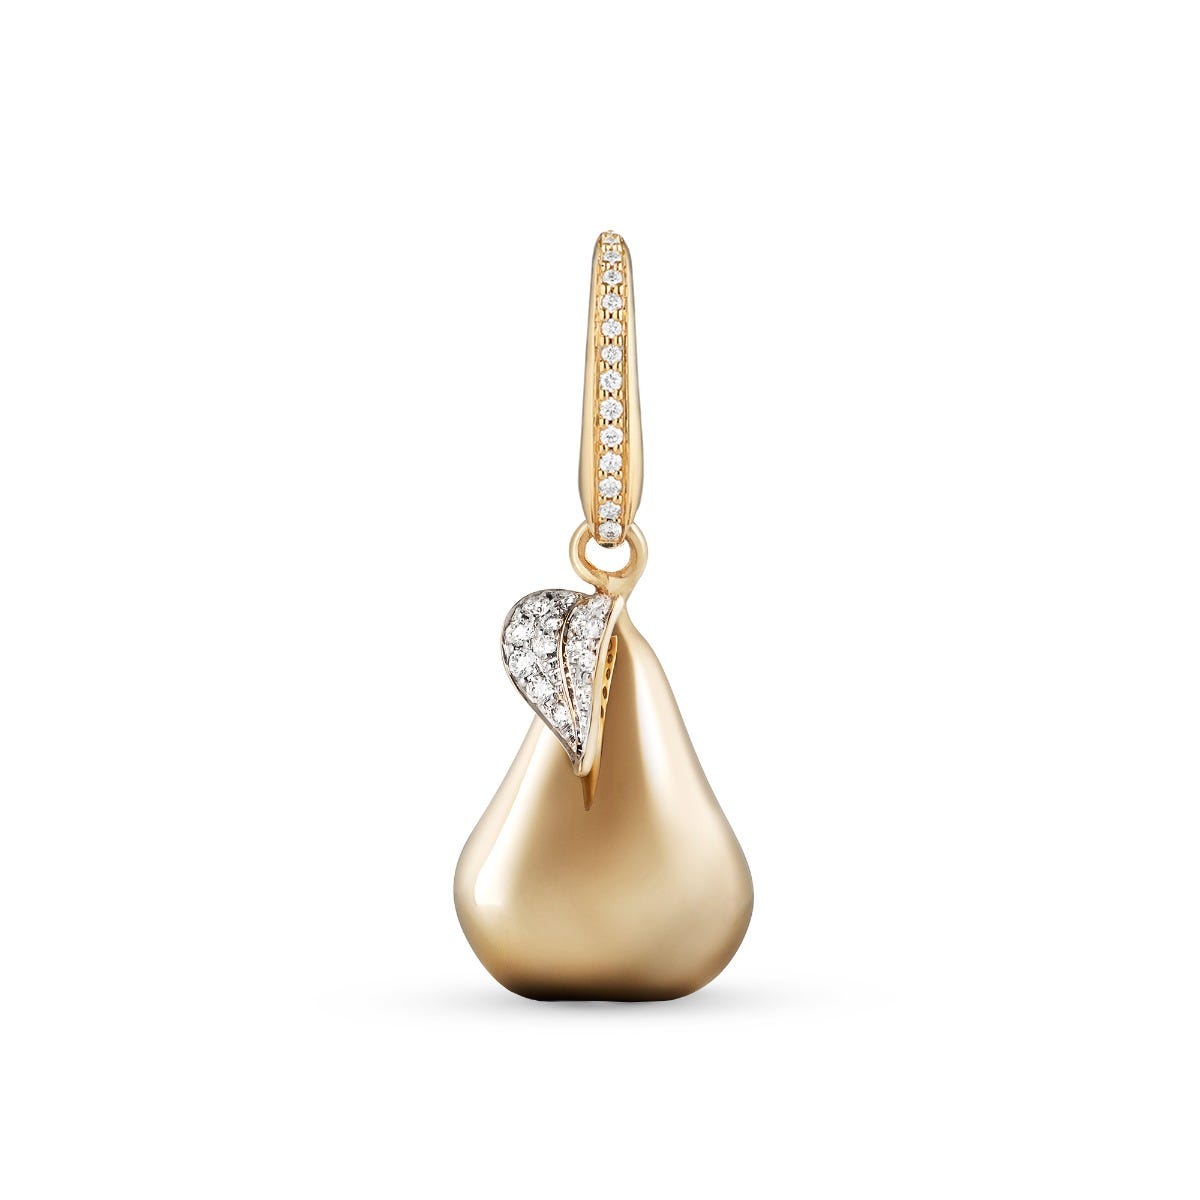 Woodland Pear Charm in 18ct Yellow Gold with Diamonds